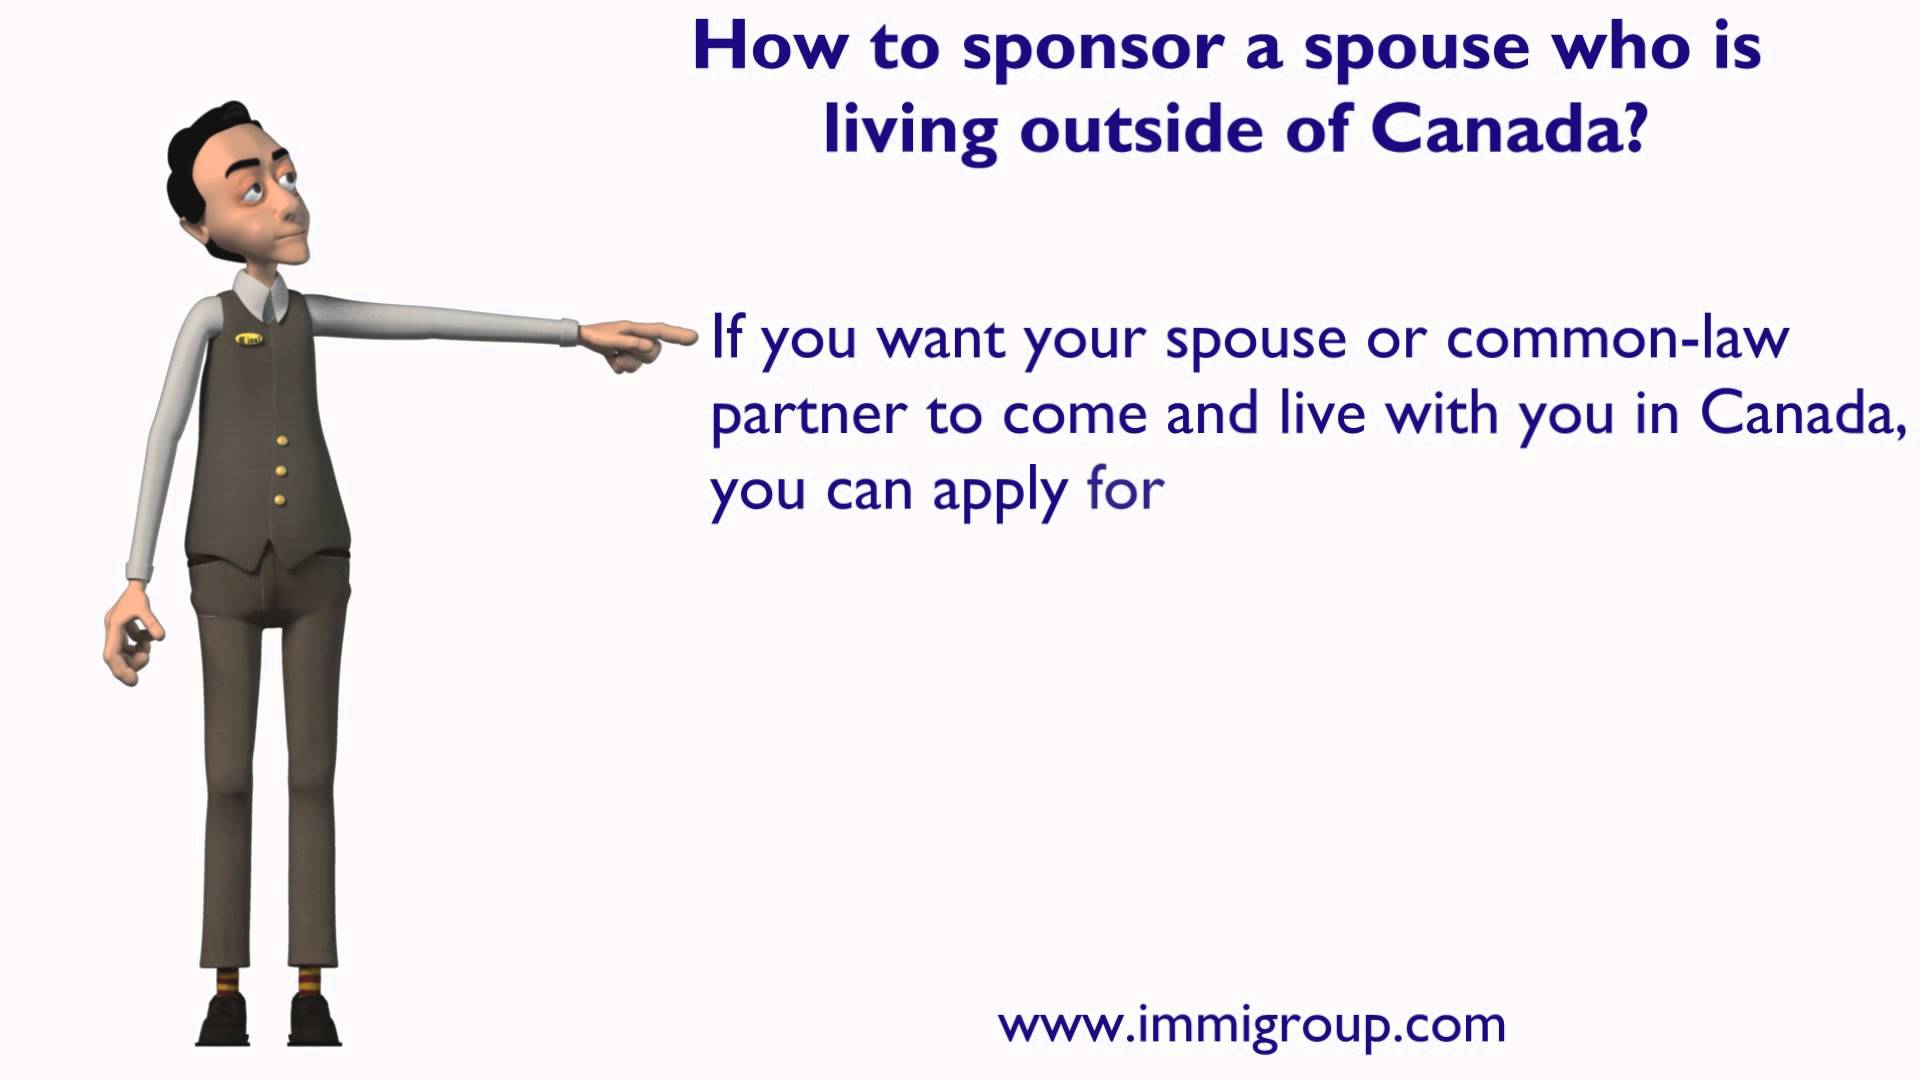 Do You Qualify For The Spousal Sponsorship in Canada?